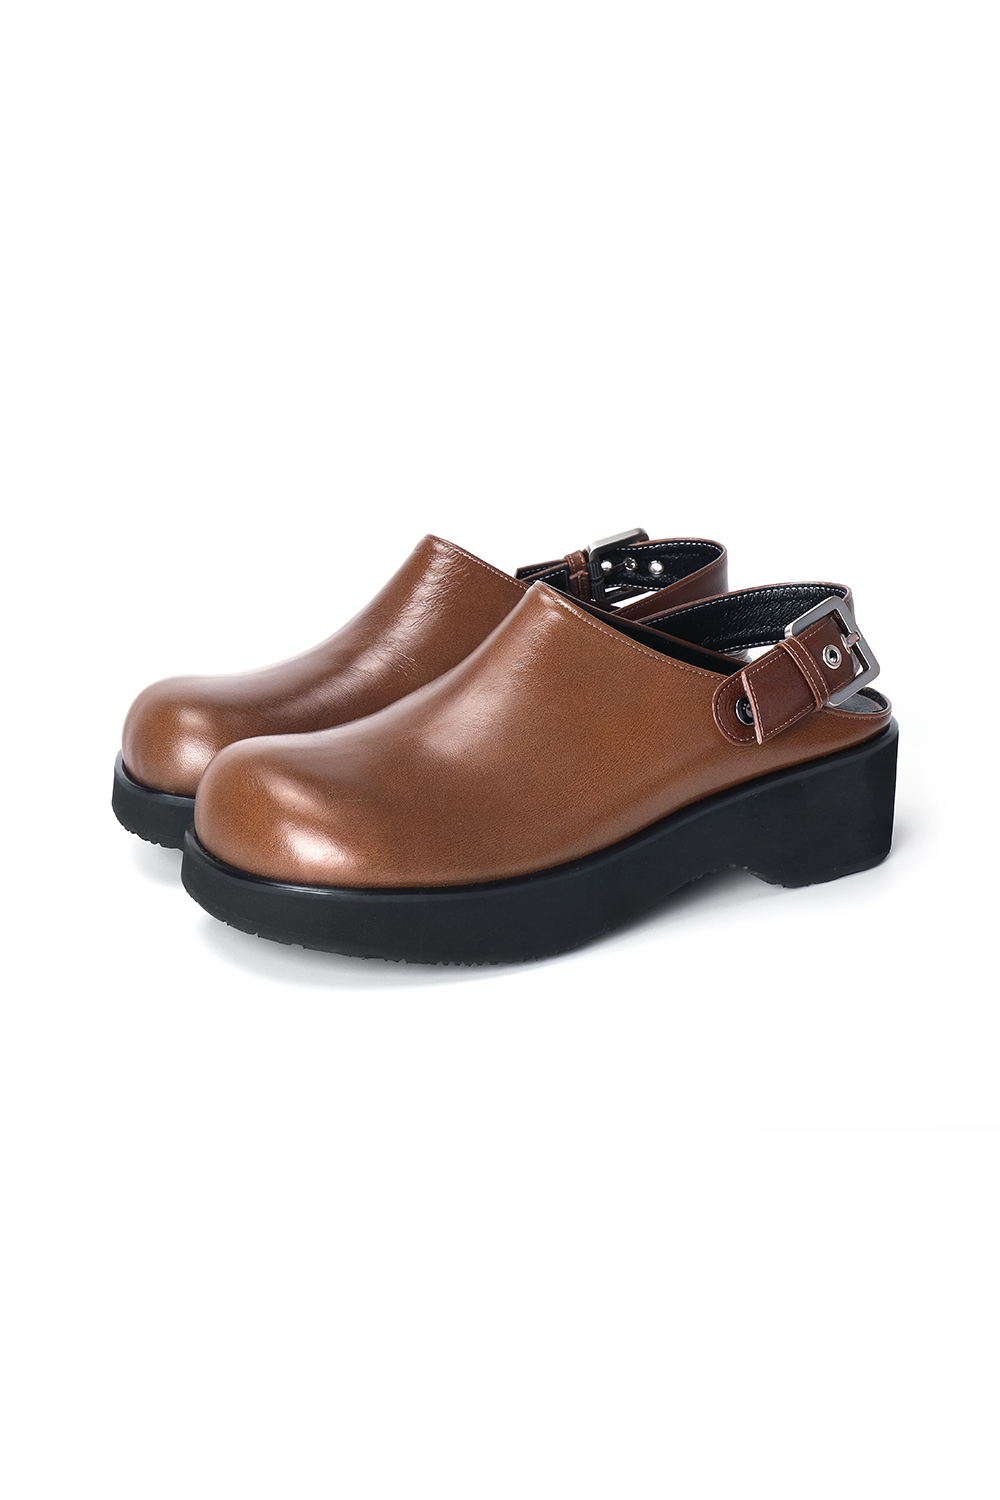 PEZ 2WAY CHUNKY CLOG [WASHED BROWN]